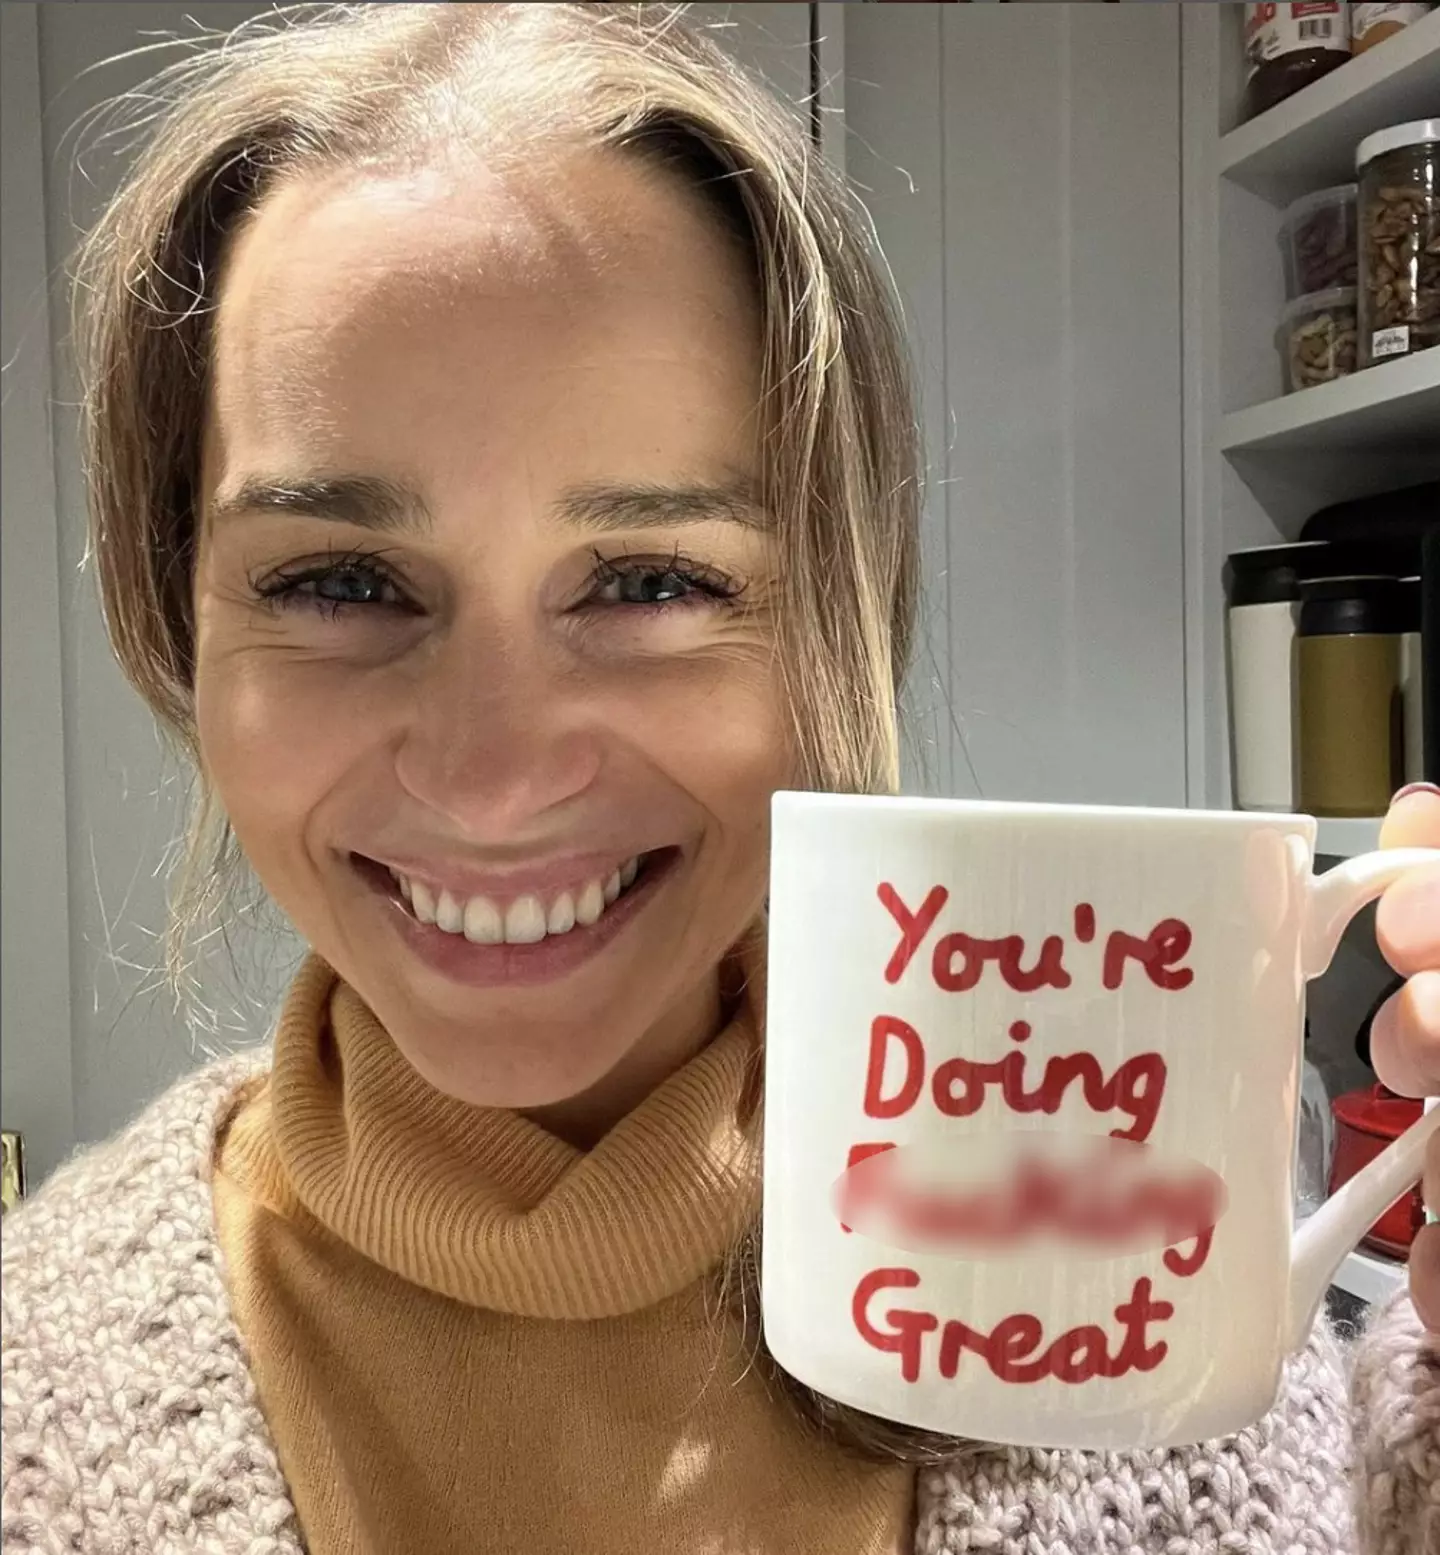 The Game of Thrones star faced some horrible comments after posting a makeup-free selfie on Instagram. Credit:@emiliaclarke/Instagram